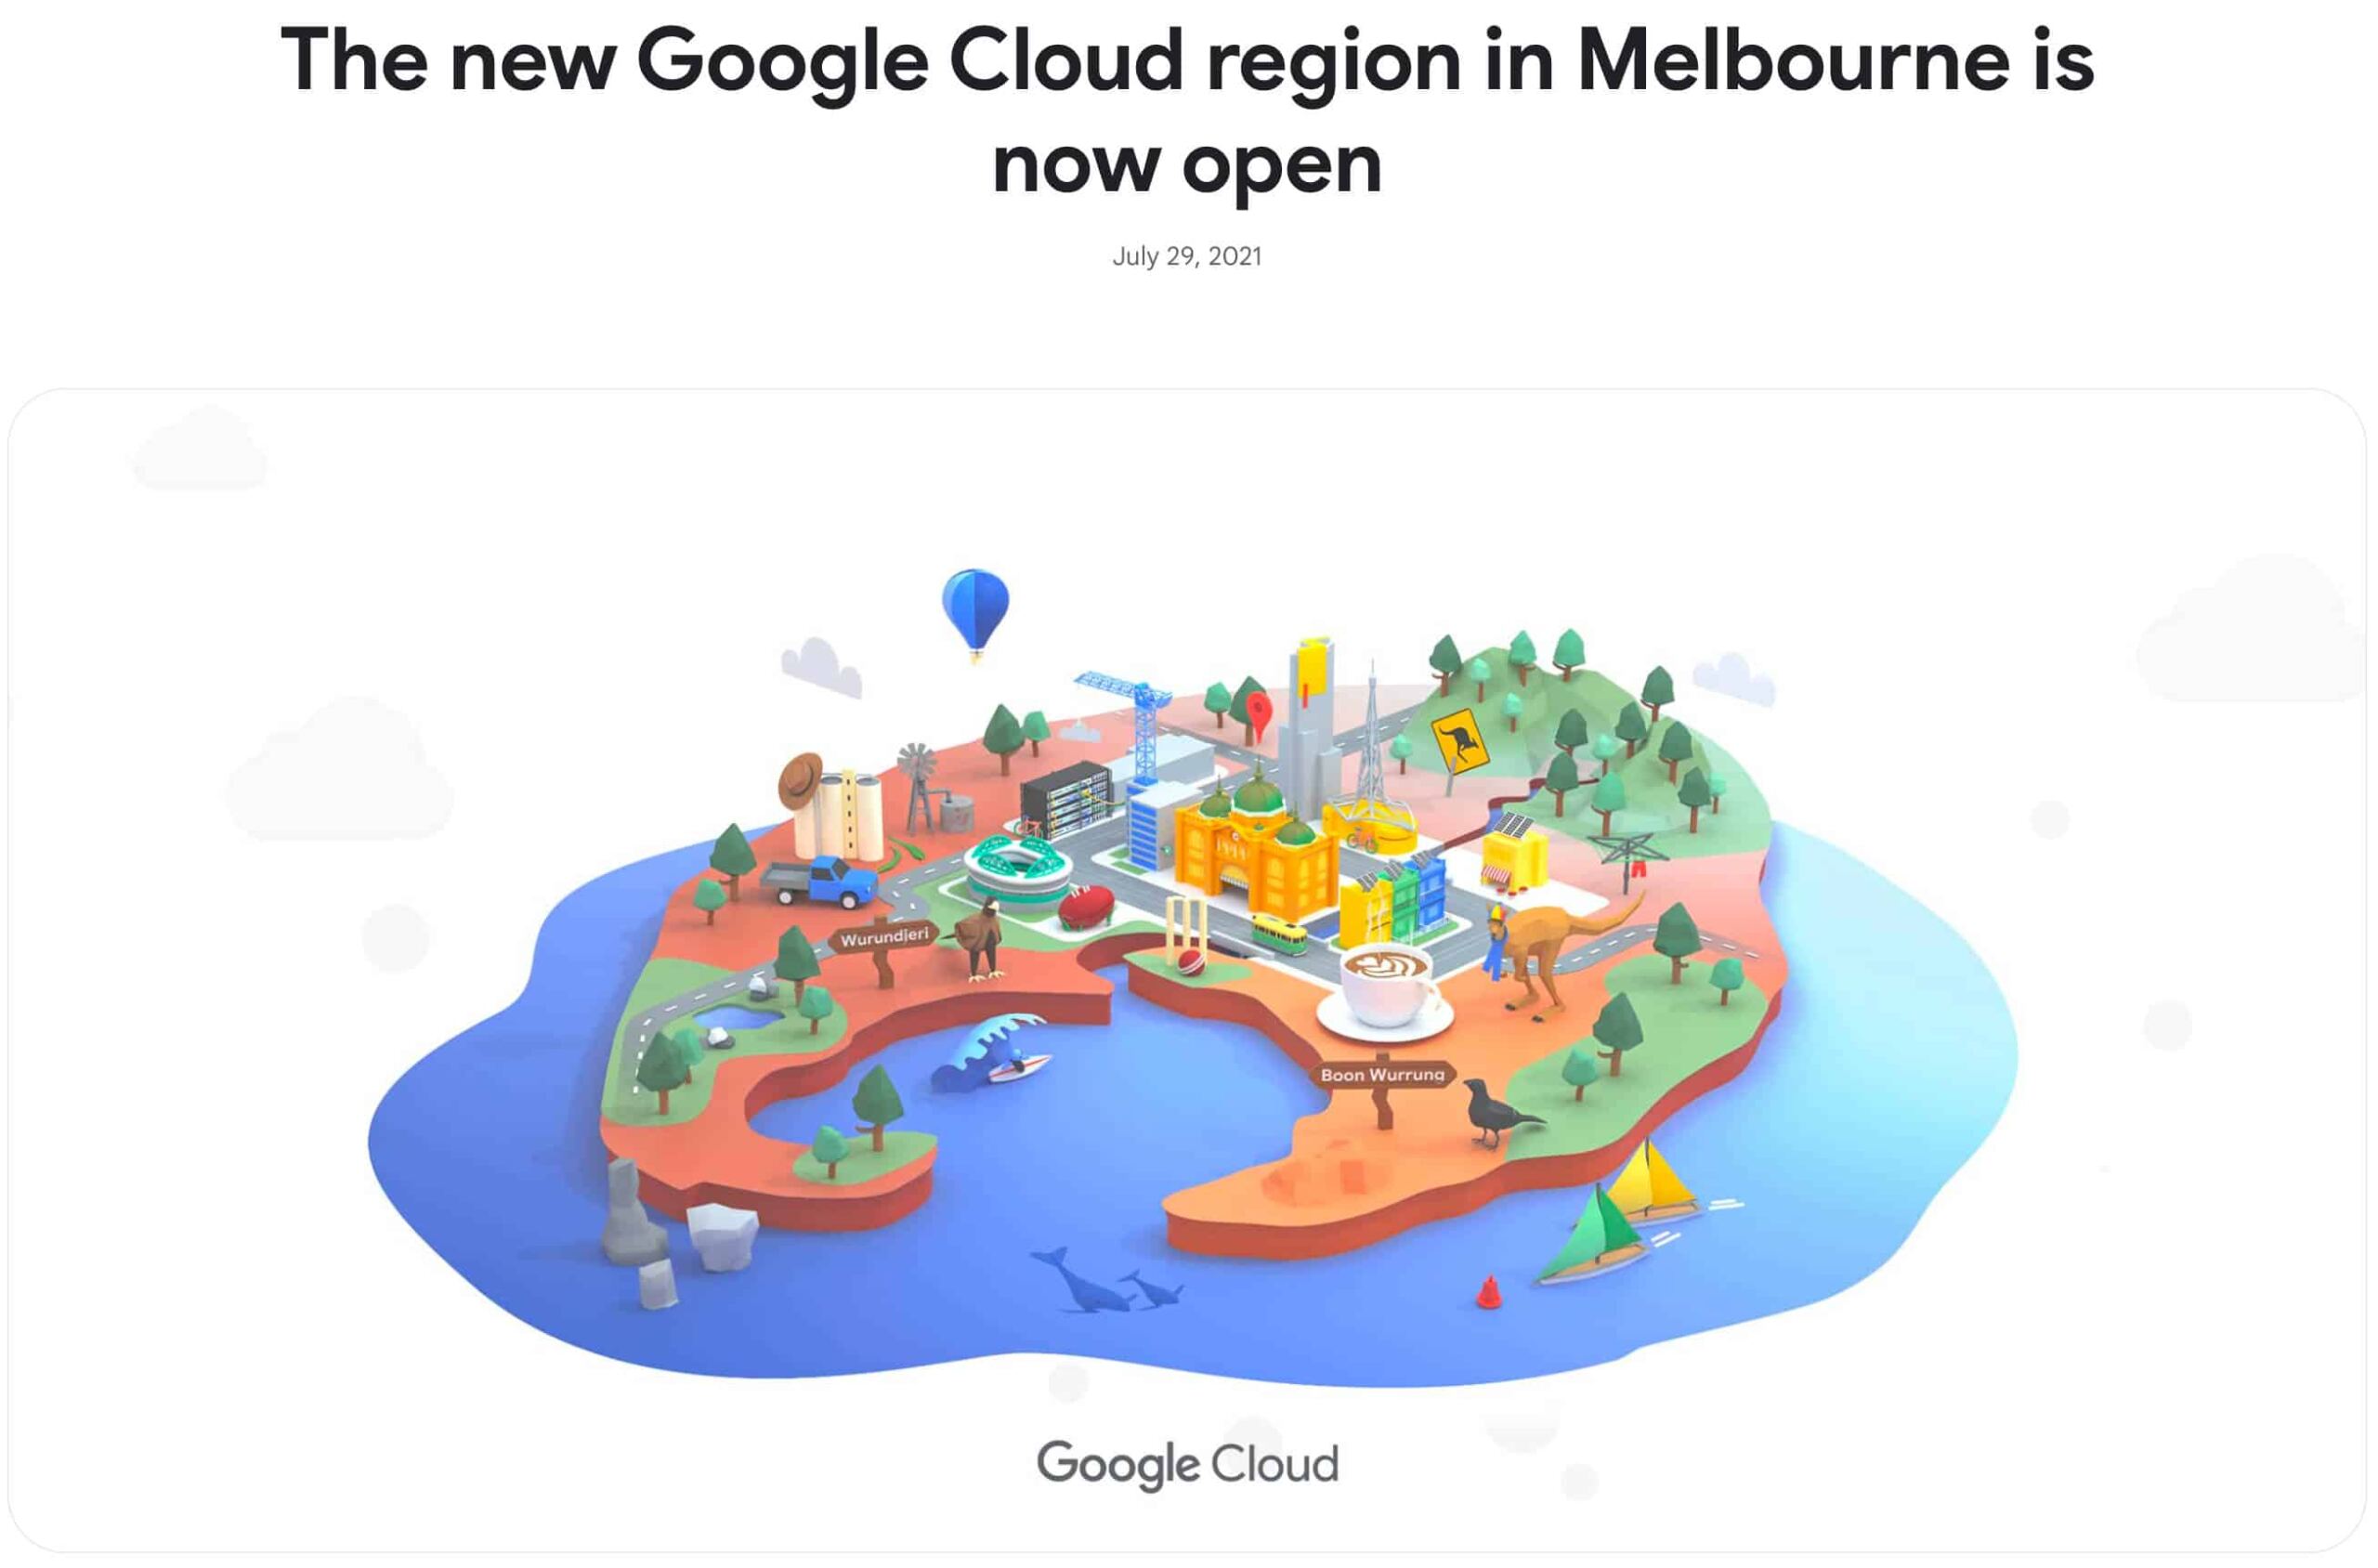 Opening of a new cloud region in Melbourne